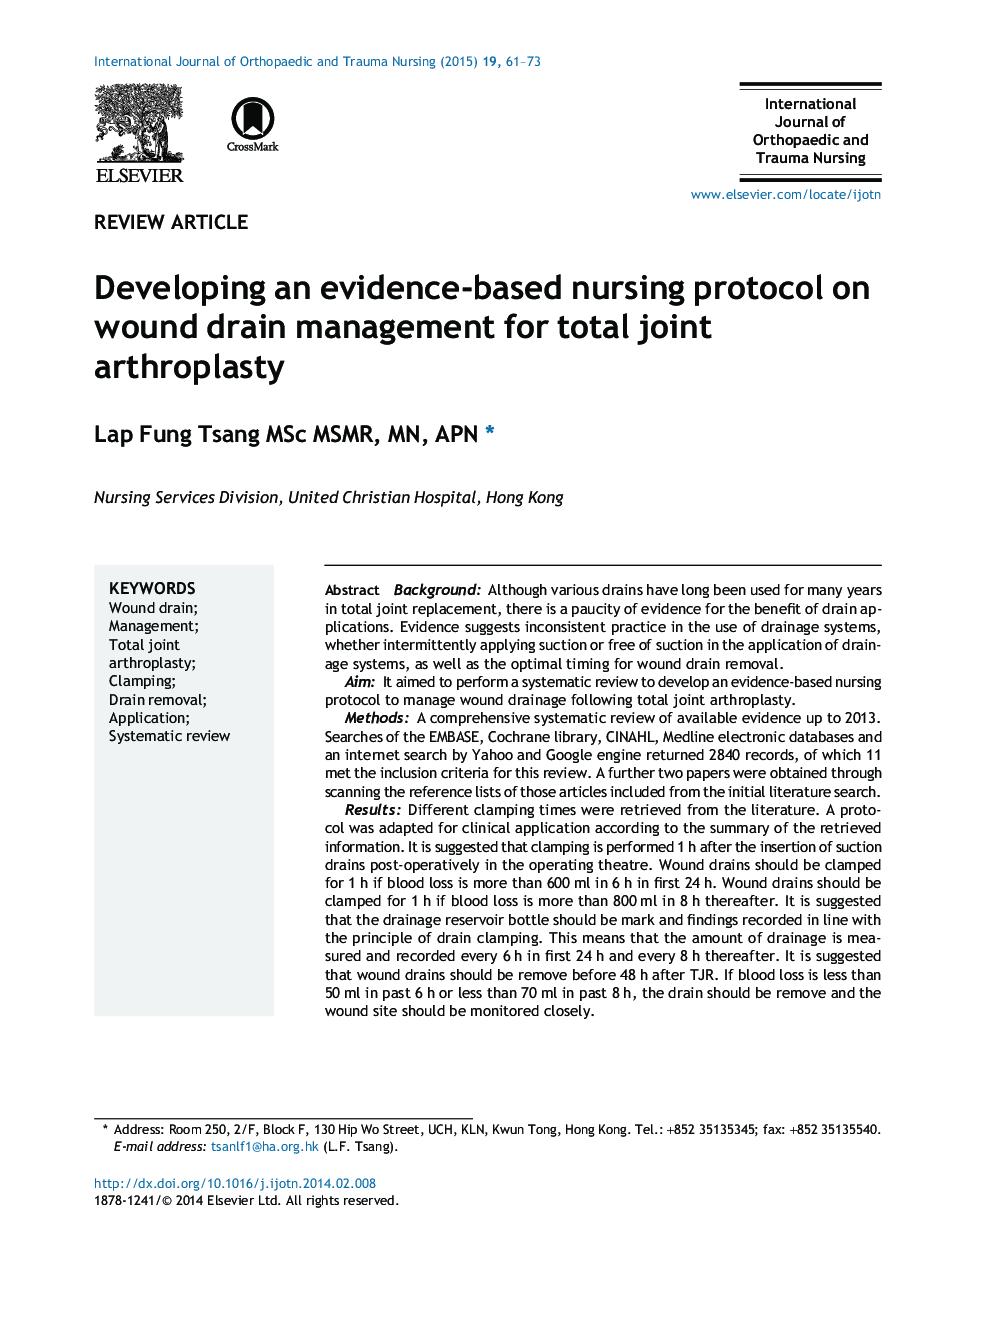 Developing an evidence-based nursing protocol on wound drain management for total joint arthroplasty